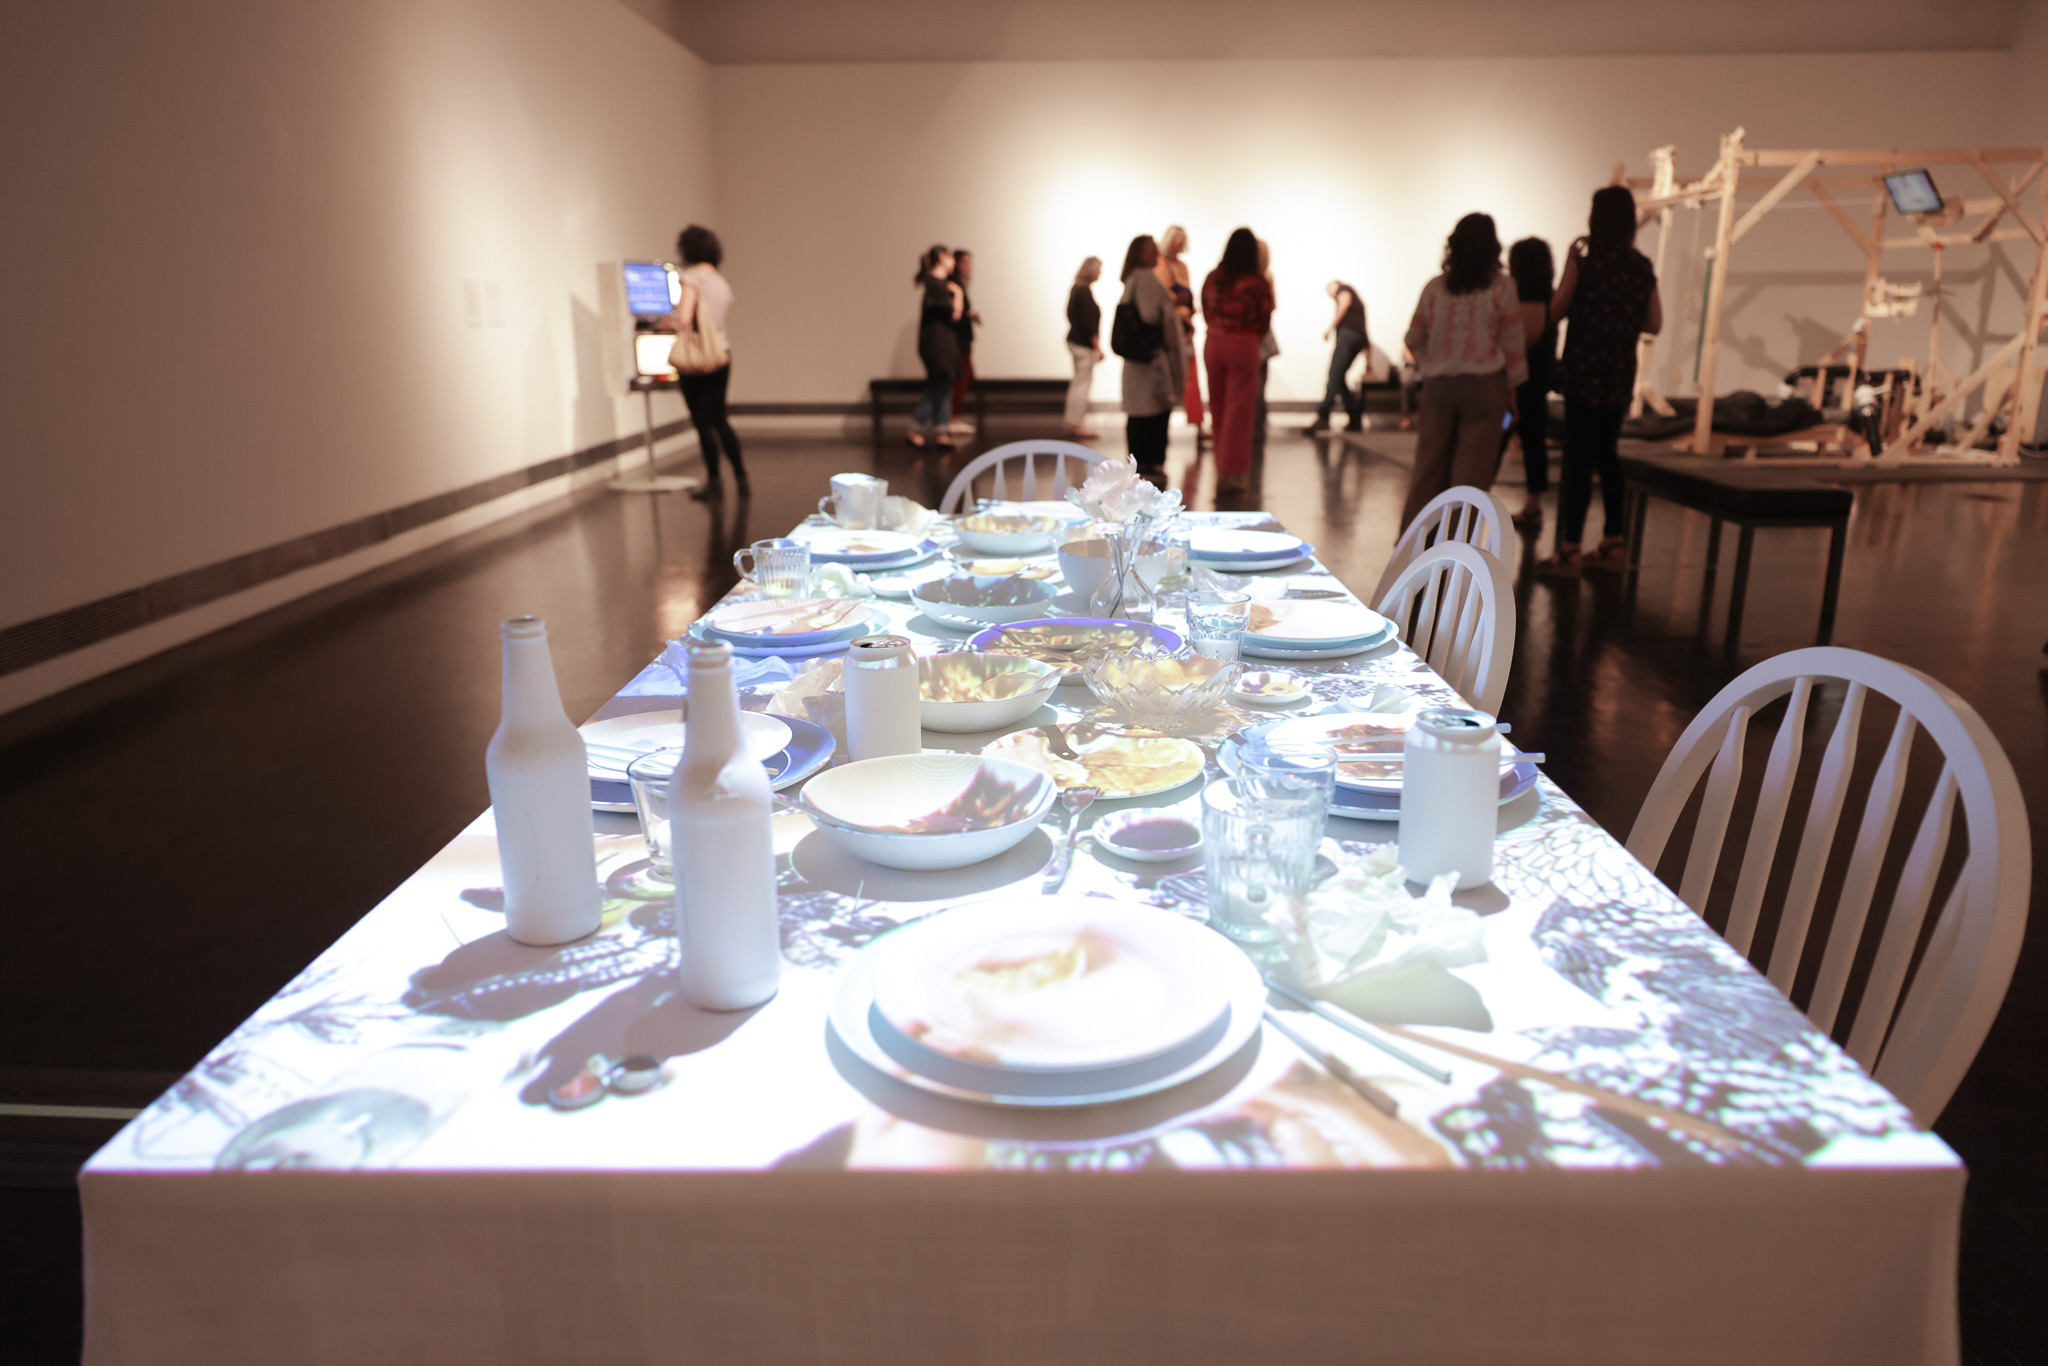 The image shows a well-set dining table with white plates, bottles, and cups, while a group of people stand and walk in the background in a spacious room.